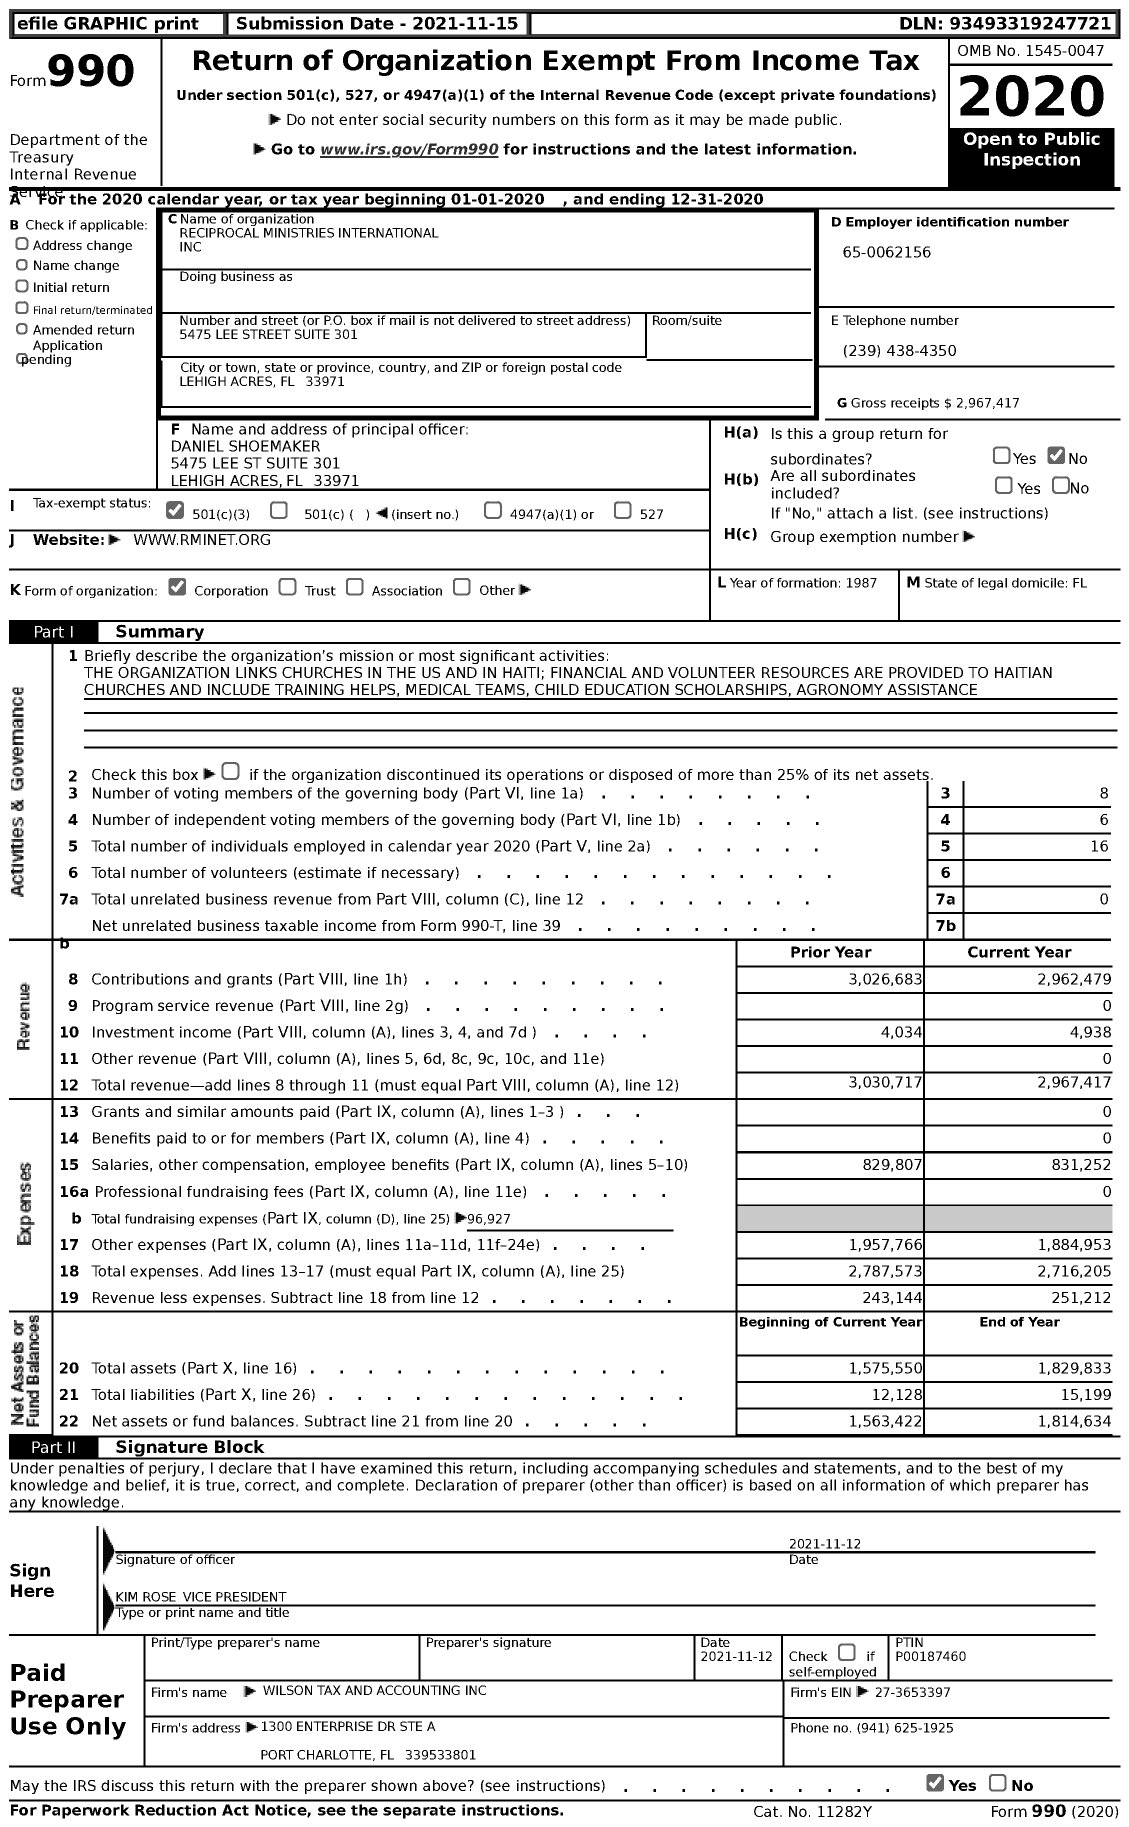 Image of first page of 2020 Form 990 for Reciprocal Ministries International